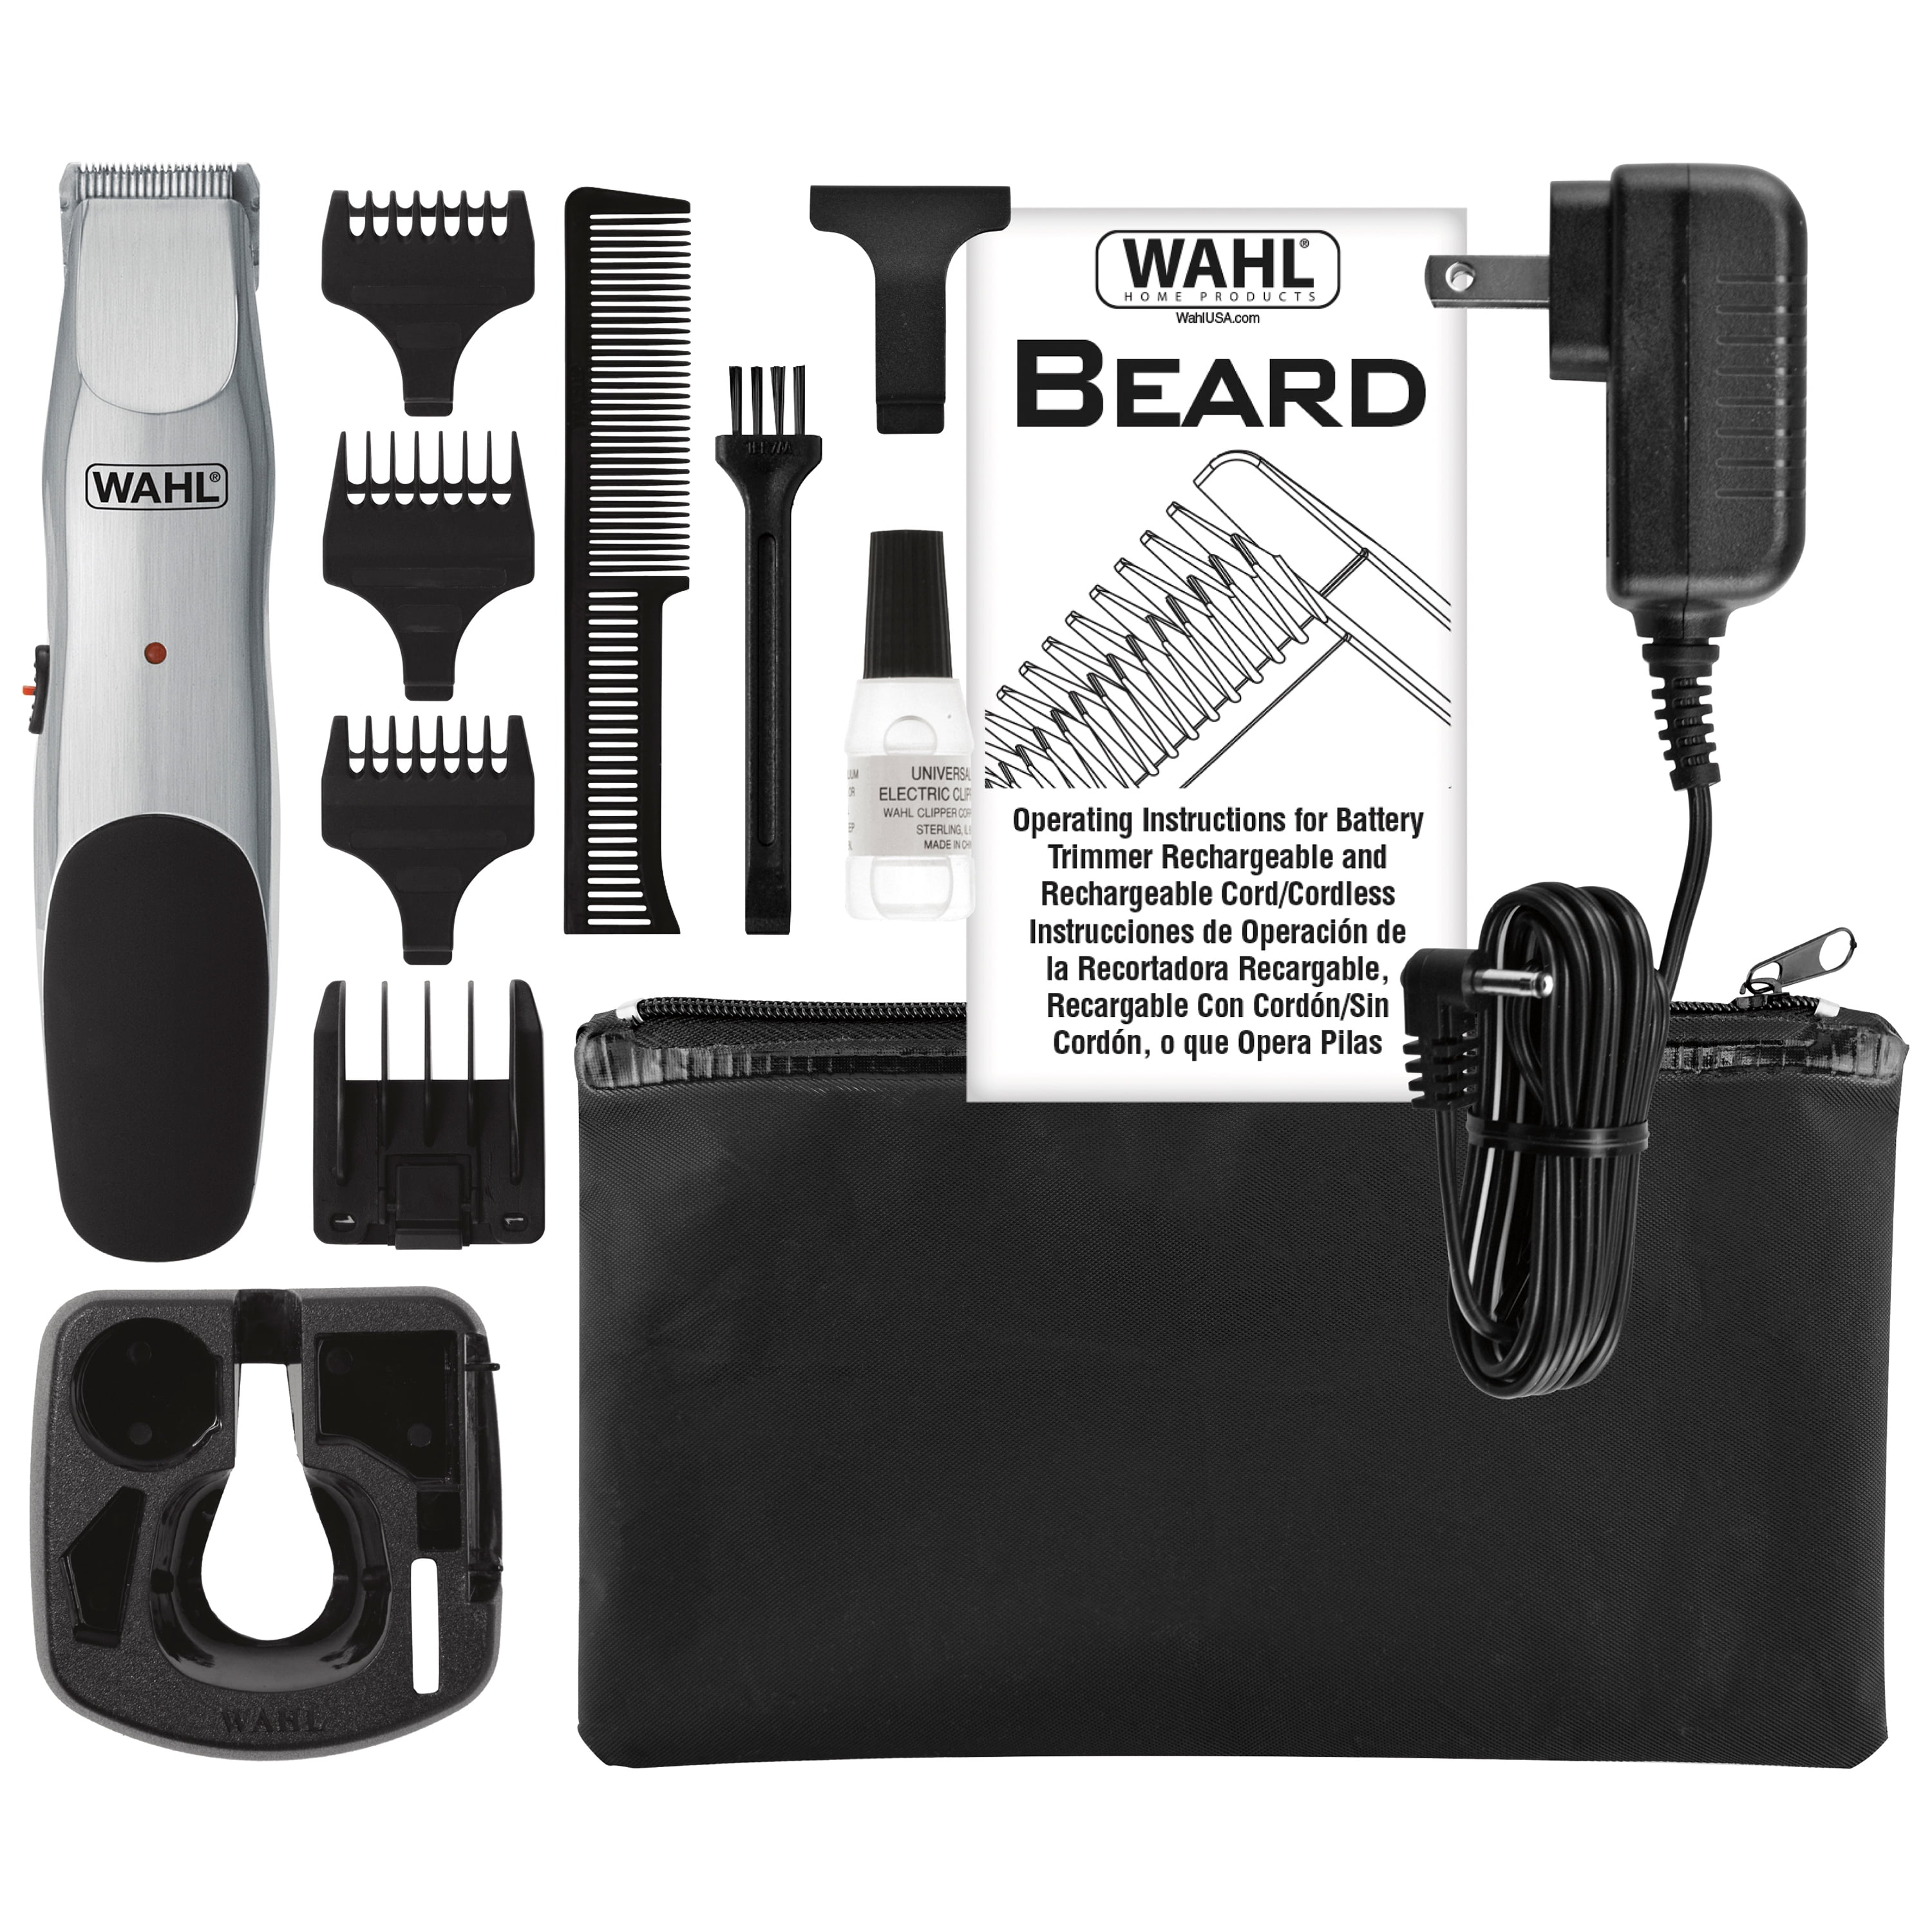 WAHL Beard Trimmer, or Cordless with Self Sharpening Blades, Model 9918-6171